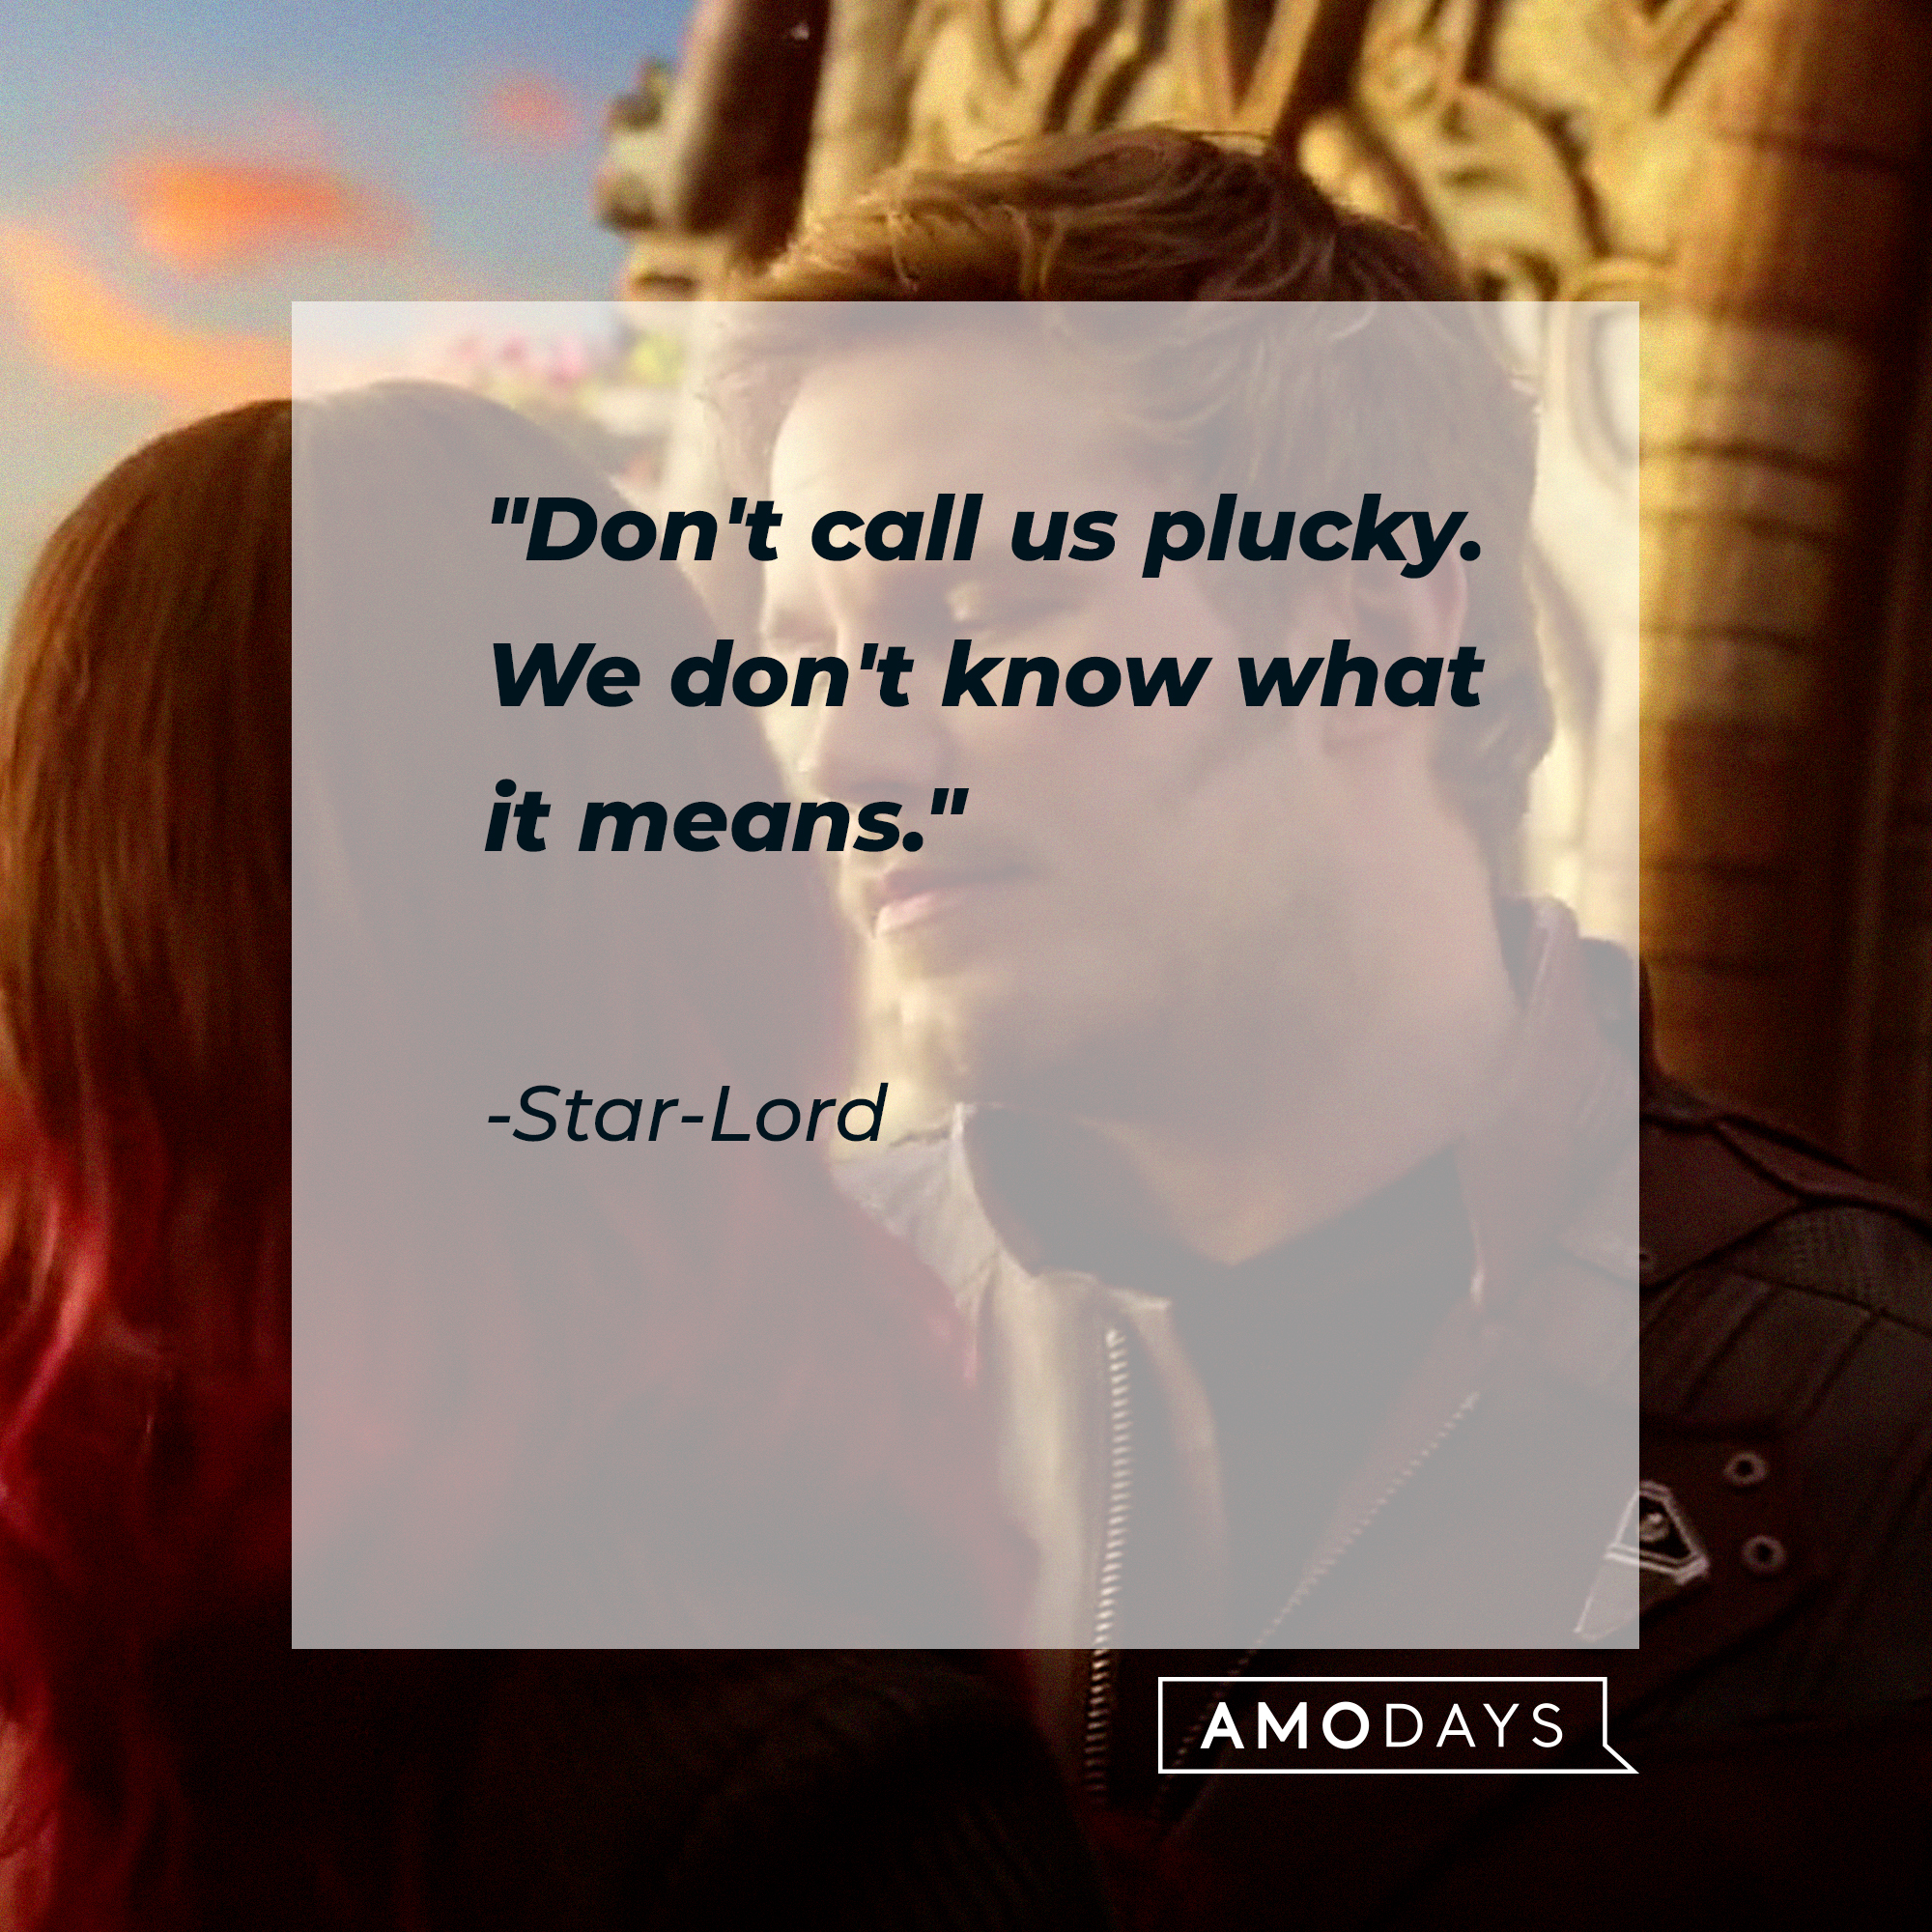 A photo of from "Guardians of the Galaxy" with Star-Lord's quote, "Don't call us plucky. We don't know what it means." | Source: Facebook/guardiansofthegalaxy